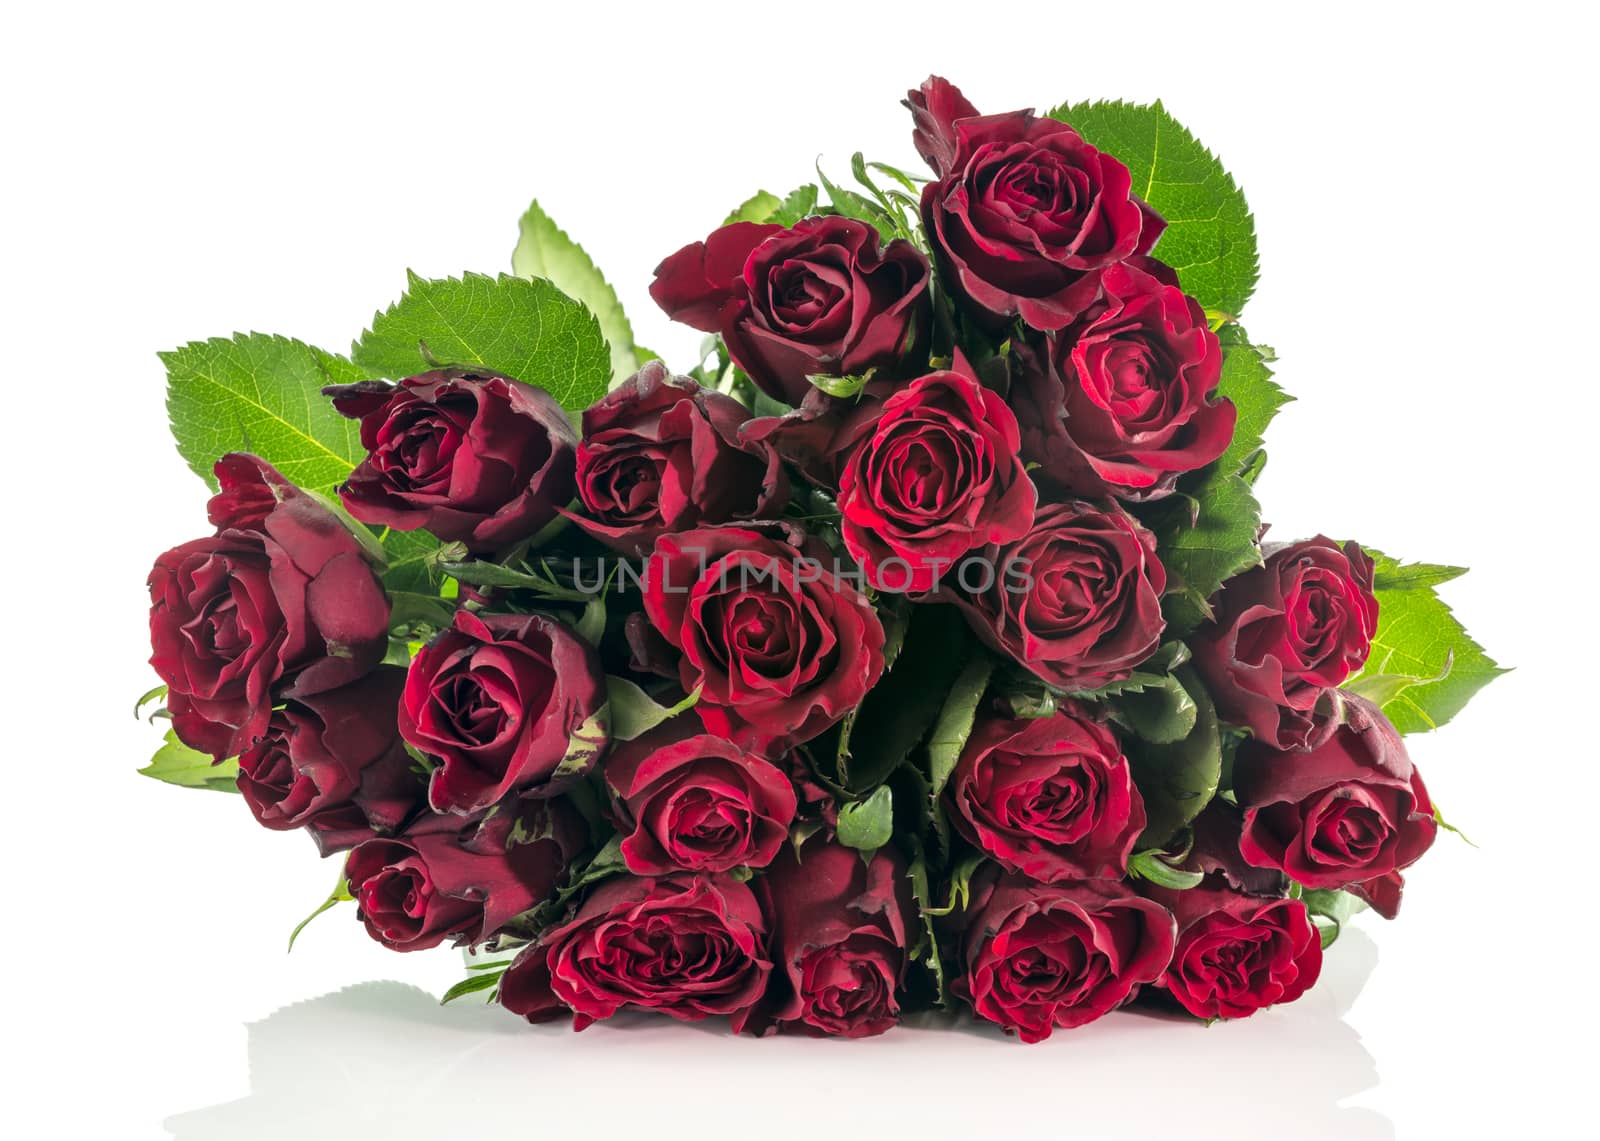 bouquet of dark red roses by compuinfoto